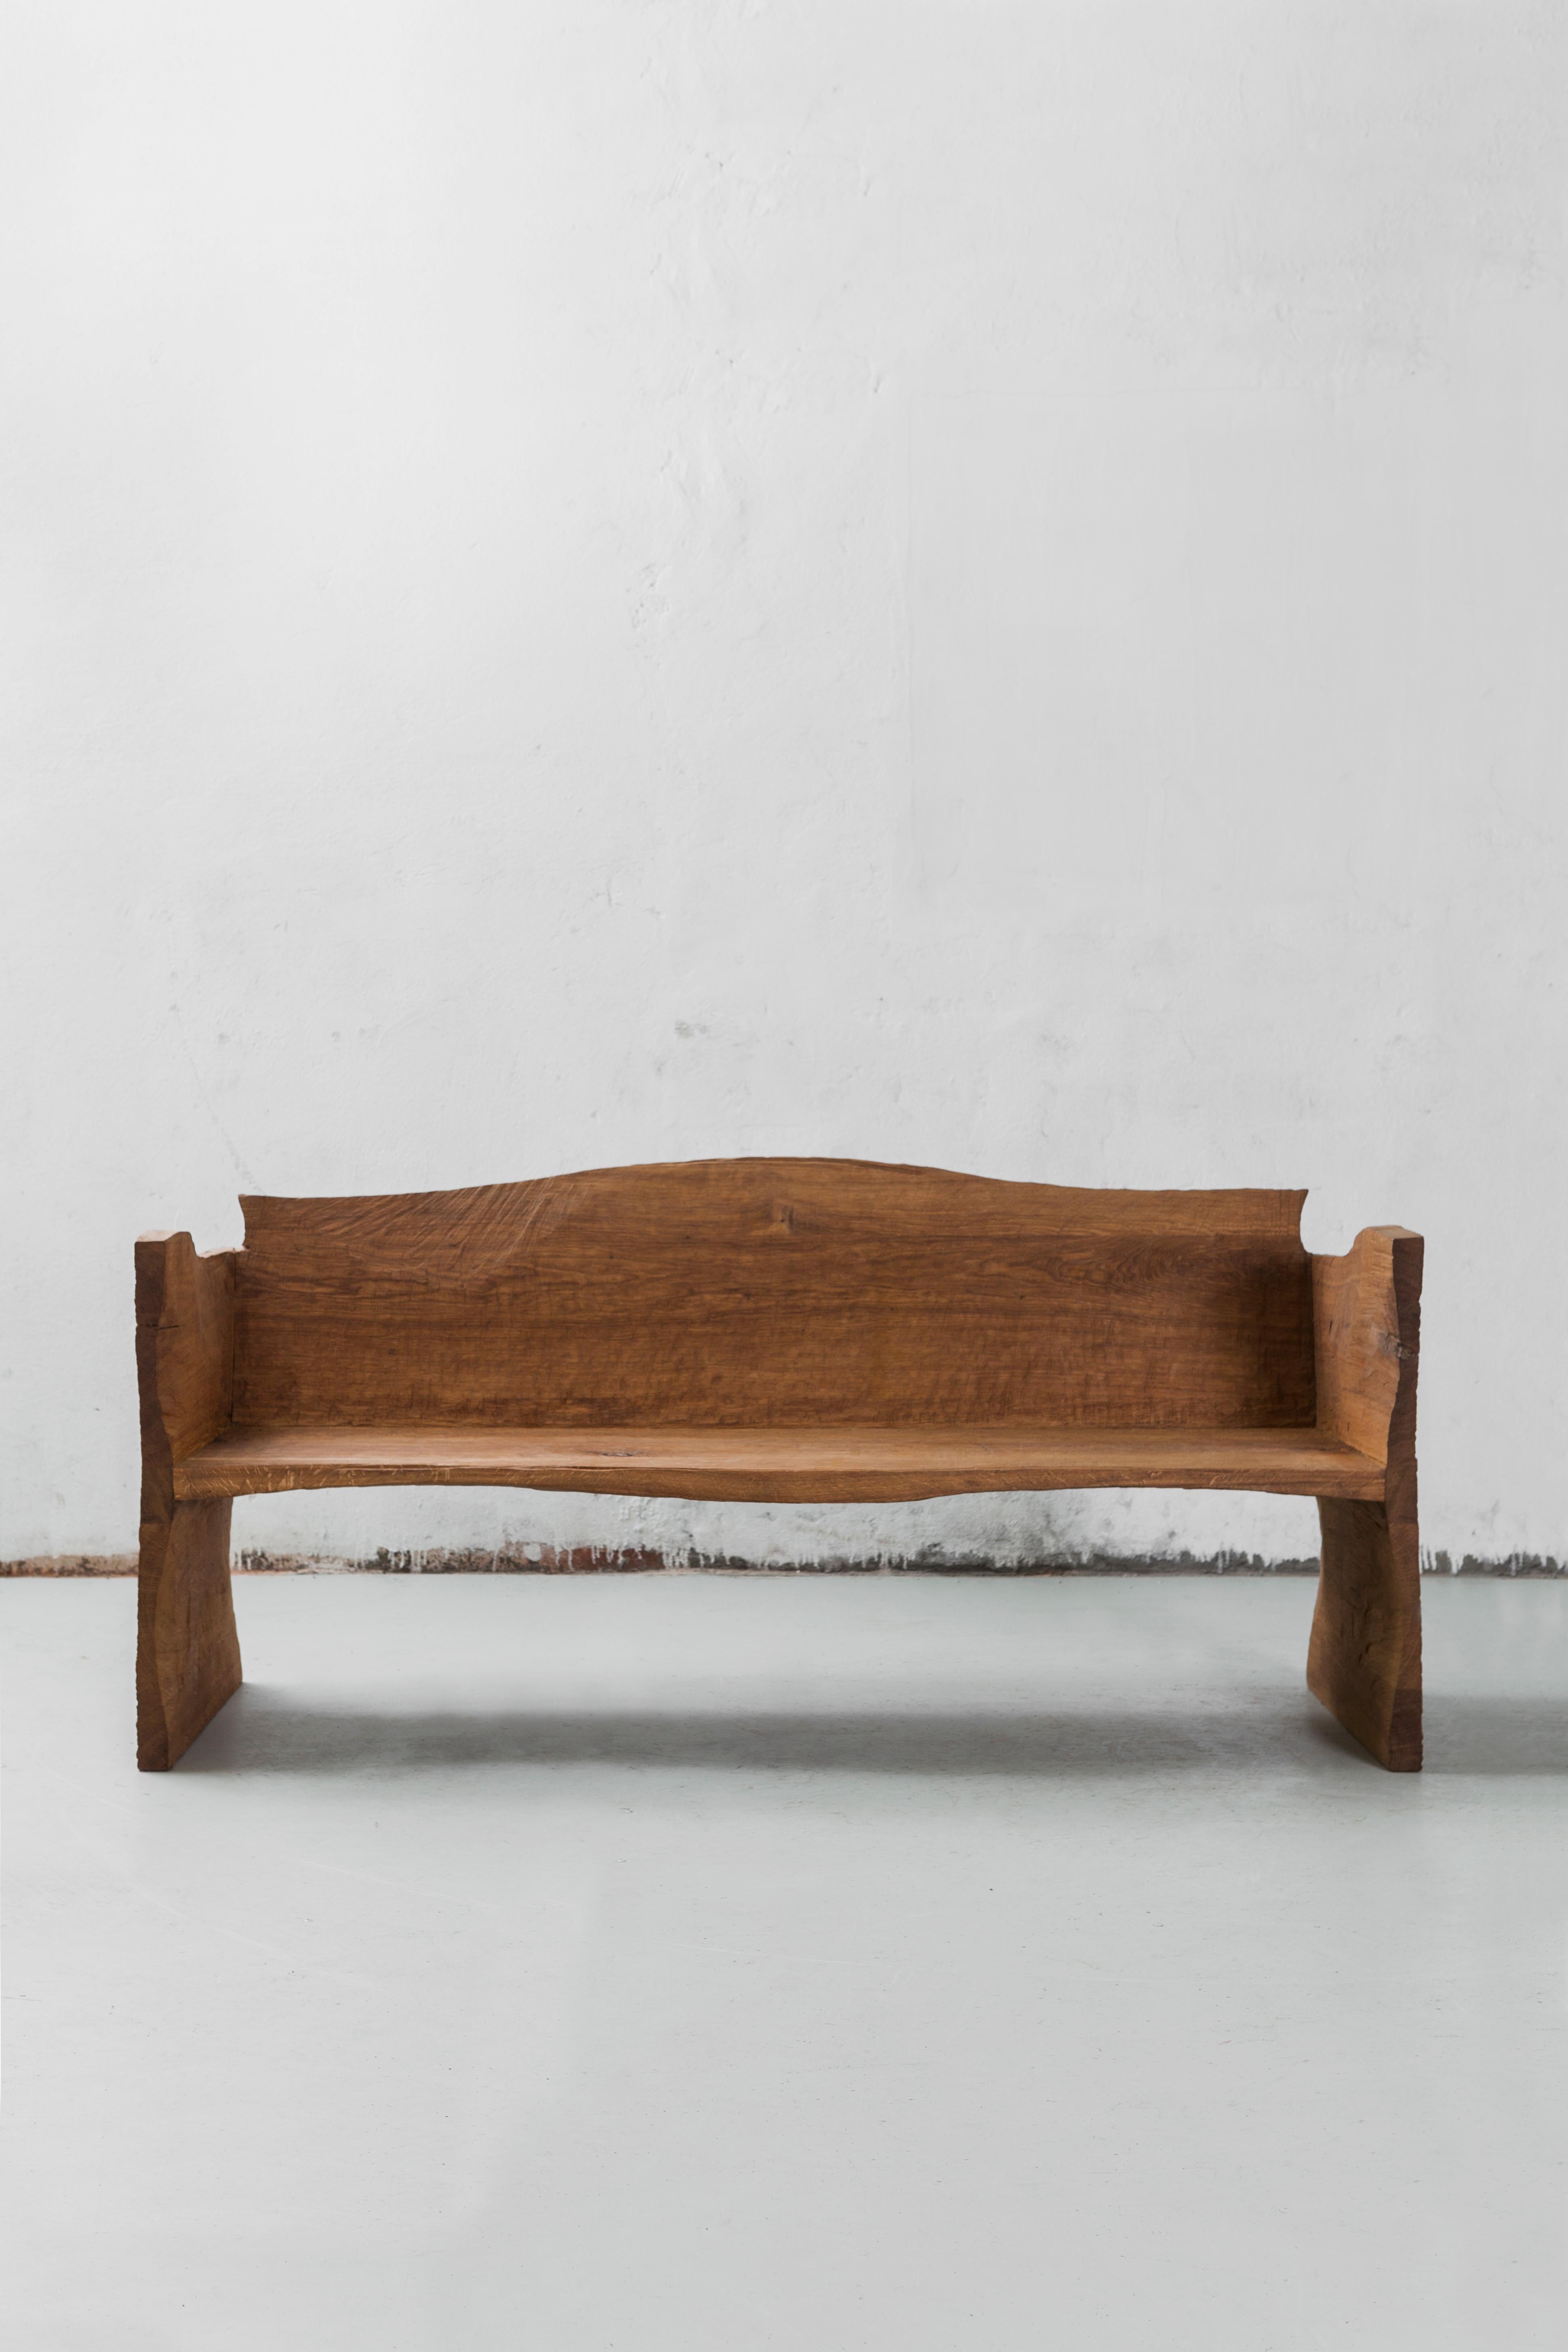 Russian Contemporary Brutalist Style Bench in Solid Oak ‘Dark’ and Linseed Oil For Sale